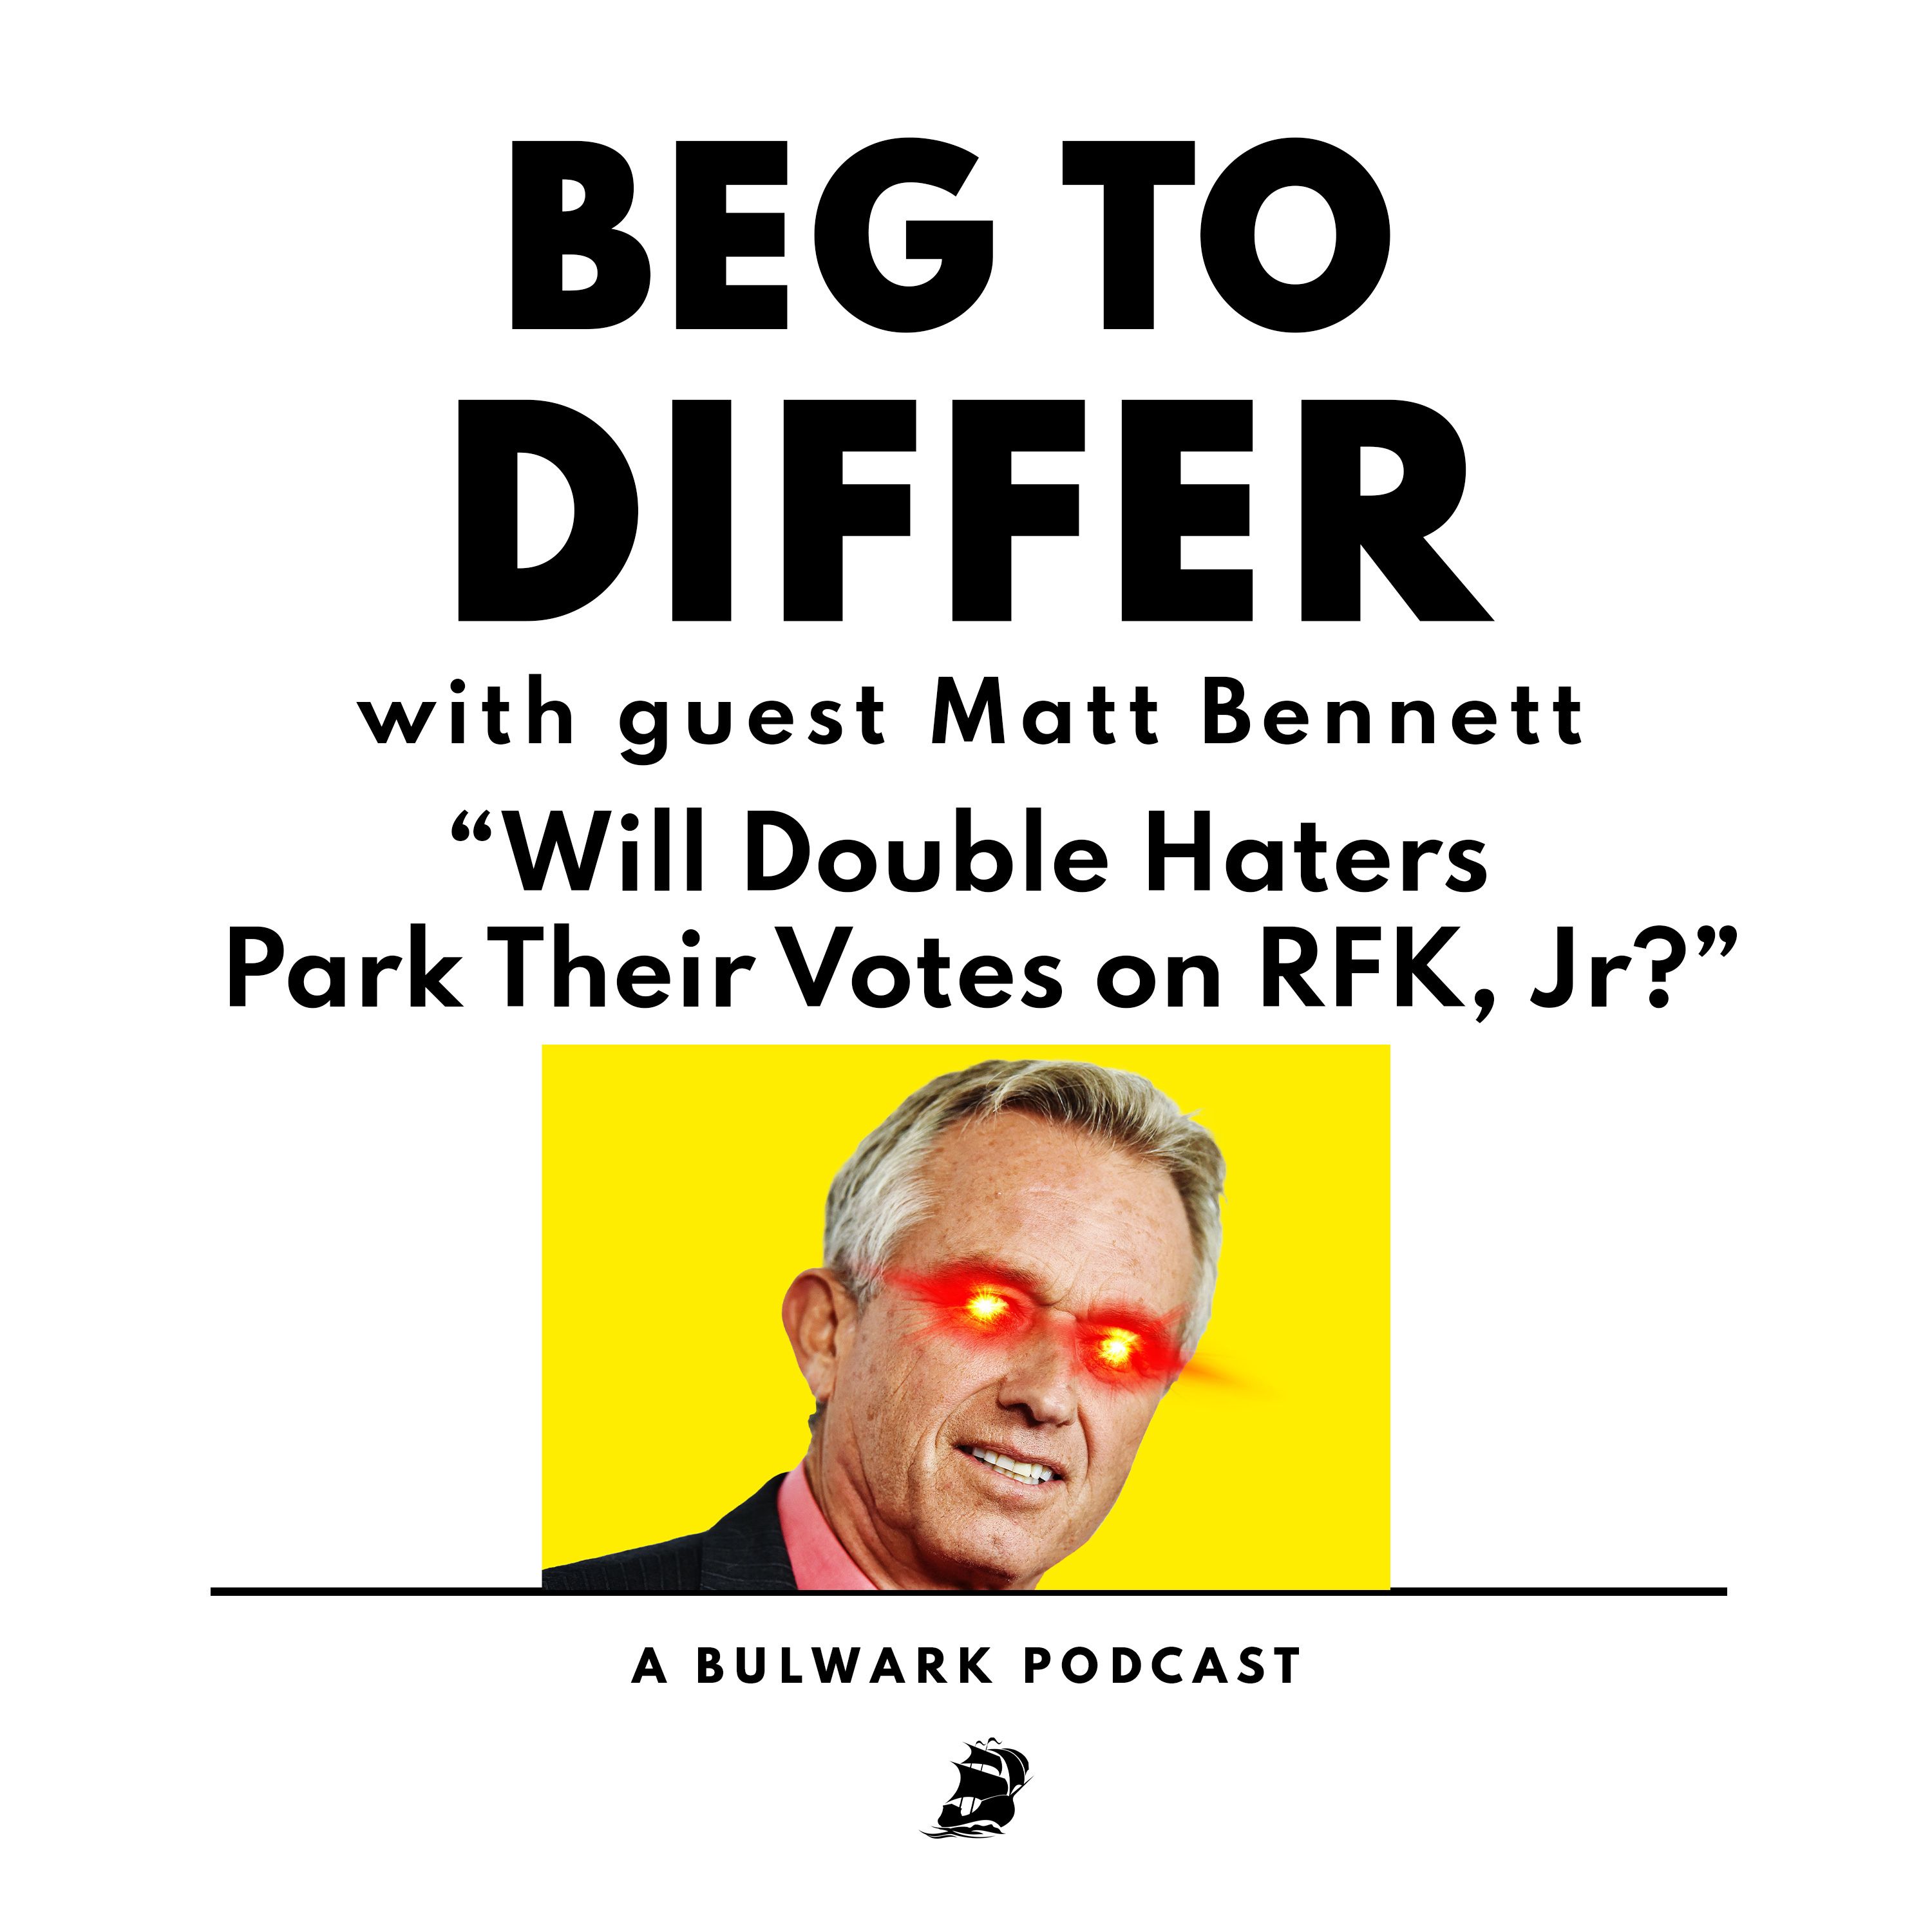 Will Double Haters Park Their Votes on RFK, Jr?